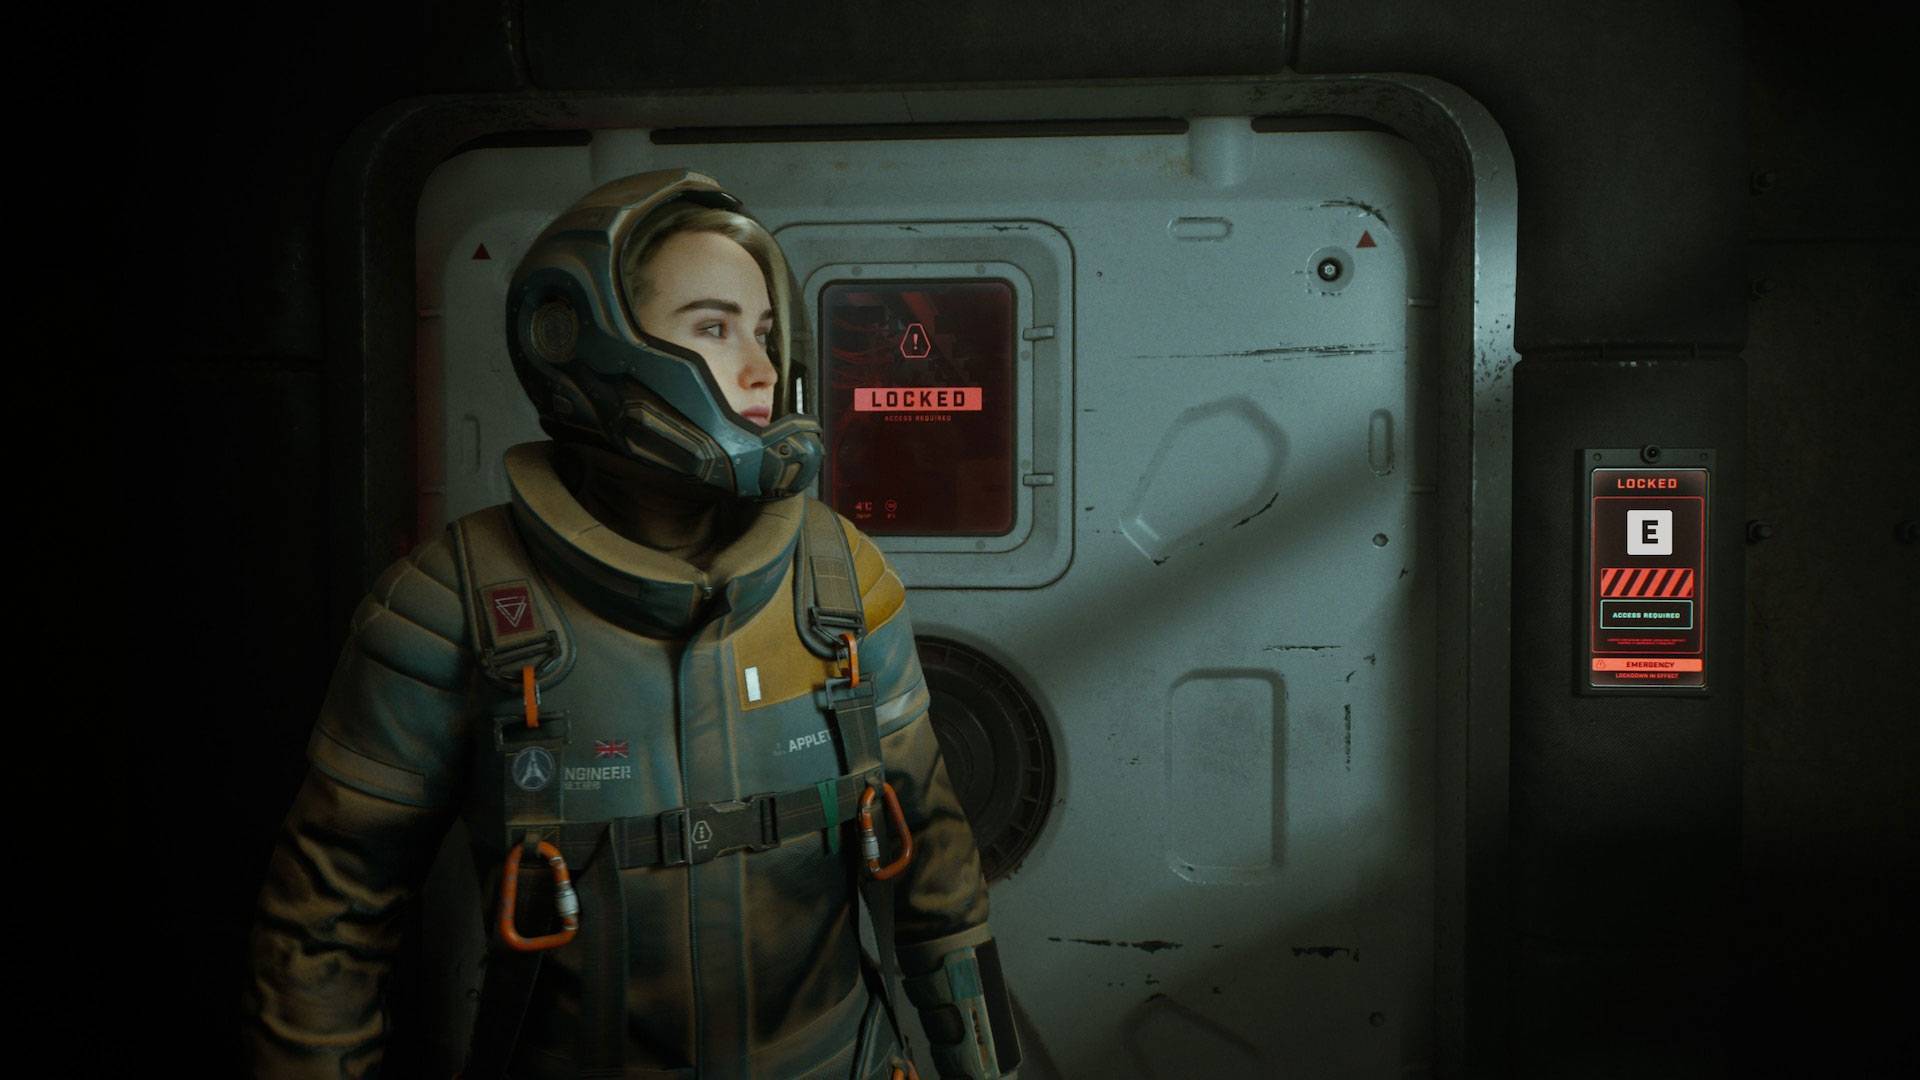 Troy Baker Leads in New Dead Space-Inspired Game Fort Solis